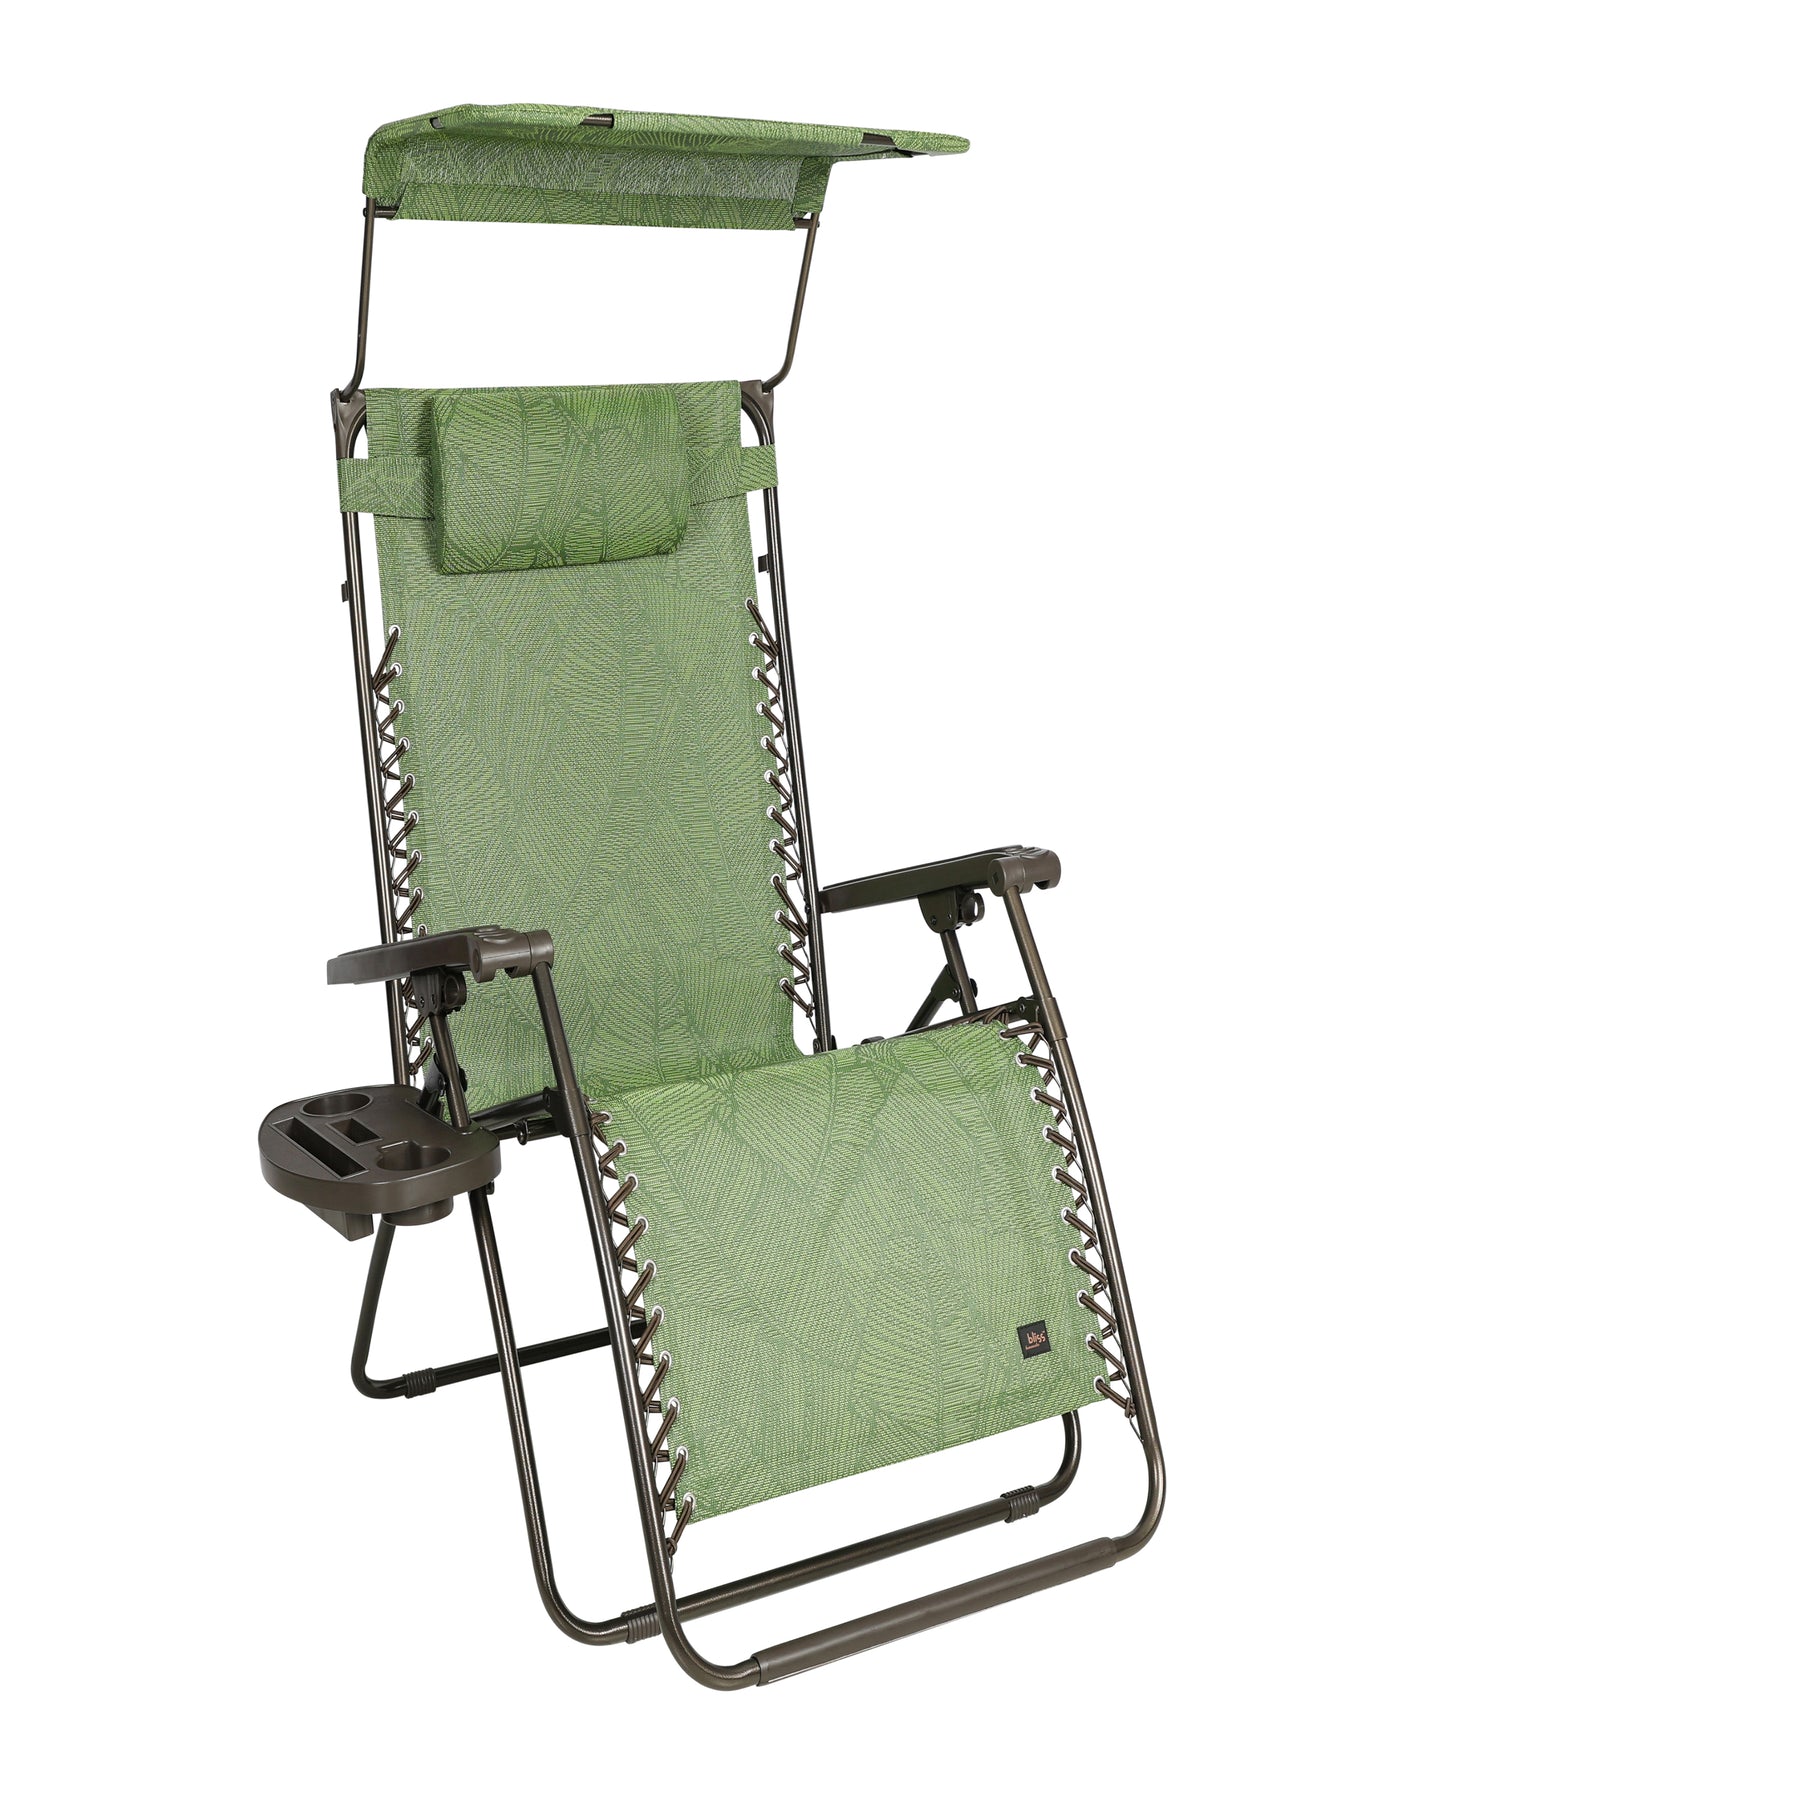 Bliss Hammocks 26-inch Wide Zero Gravity Chair with Canopy, Pillow, and Drink Tray in the green banana leaves variation.